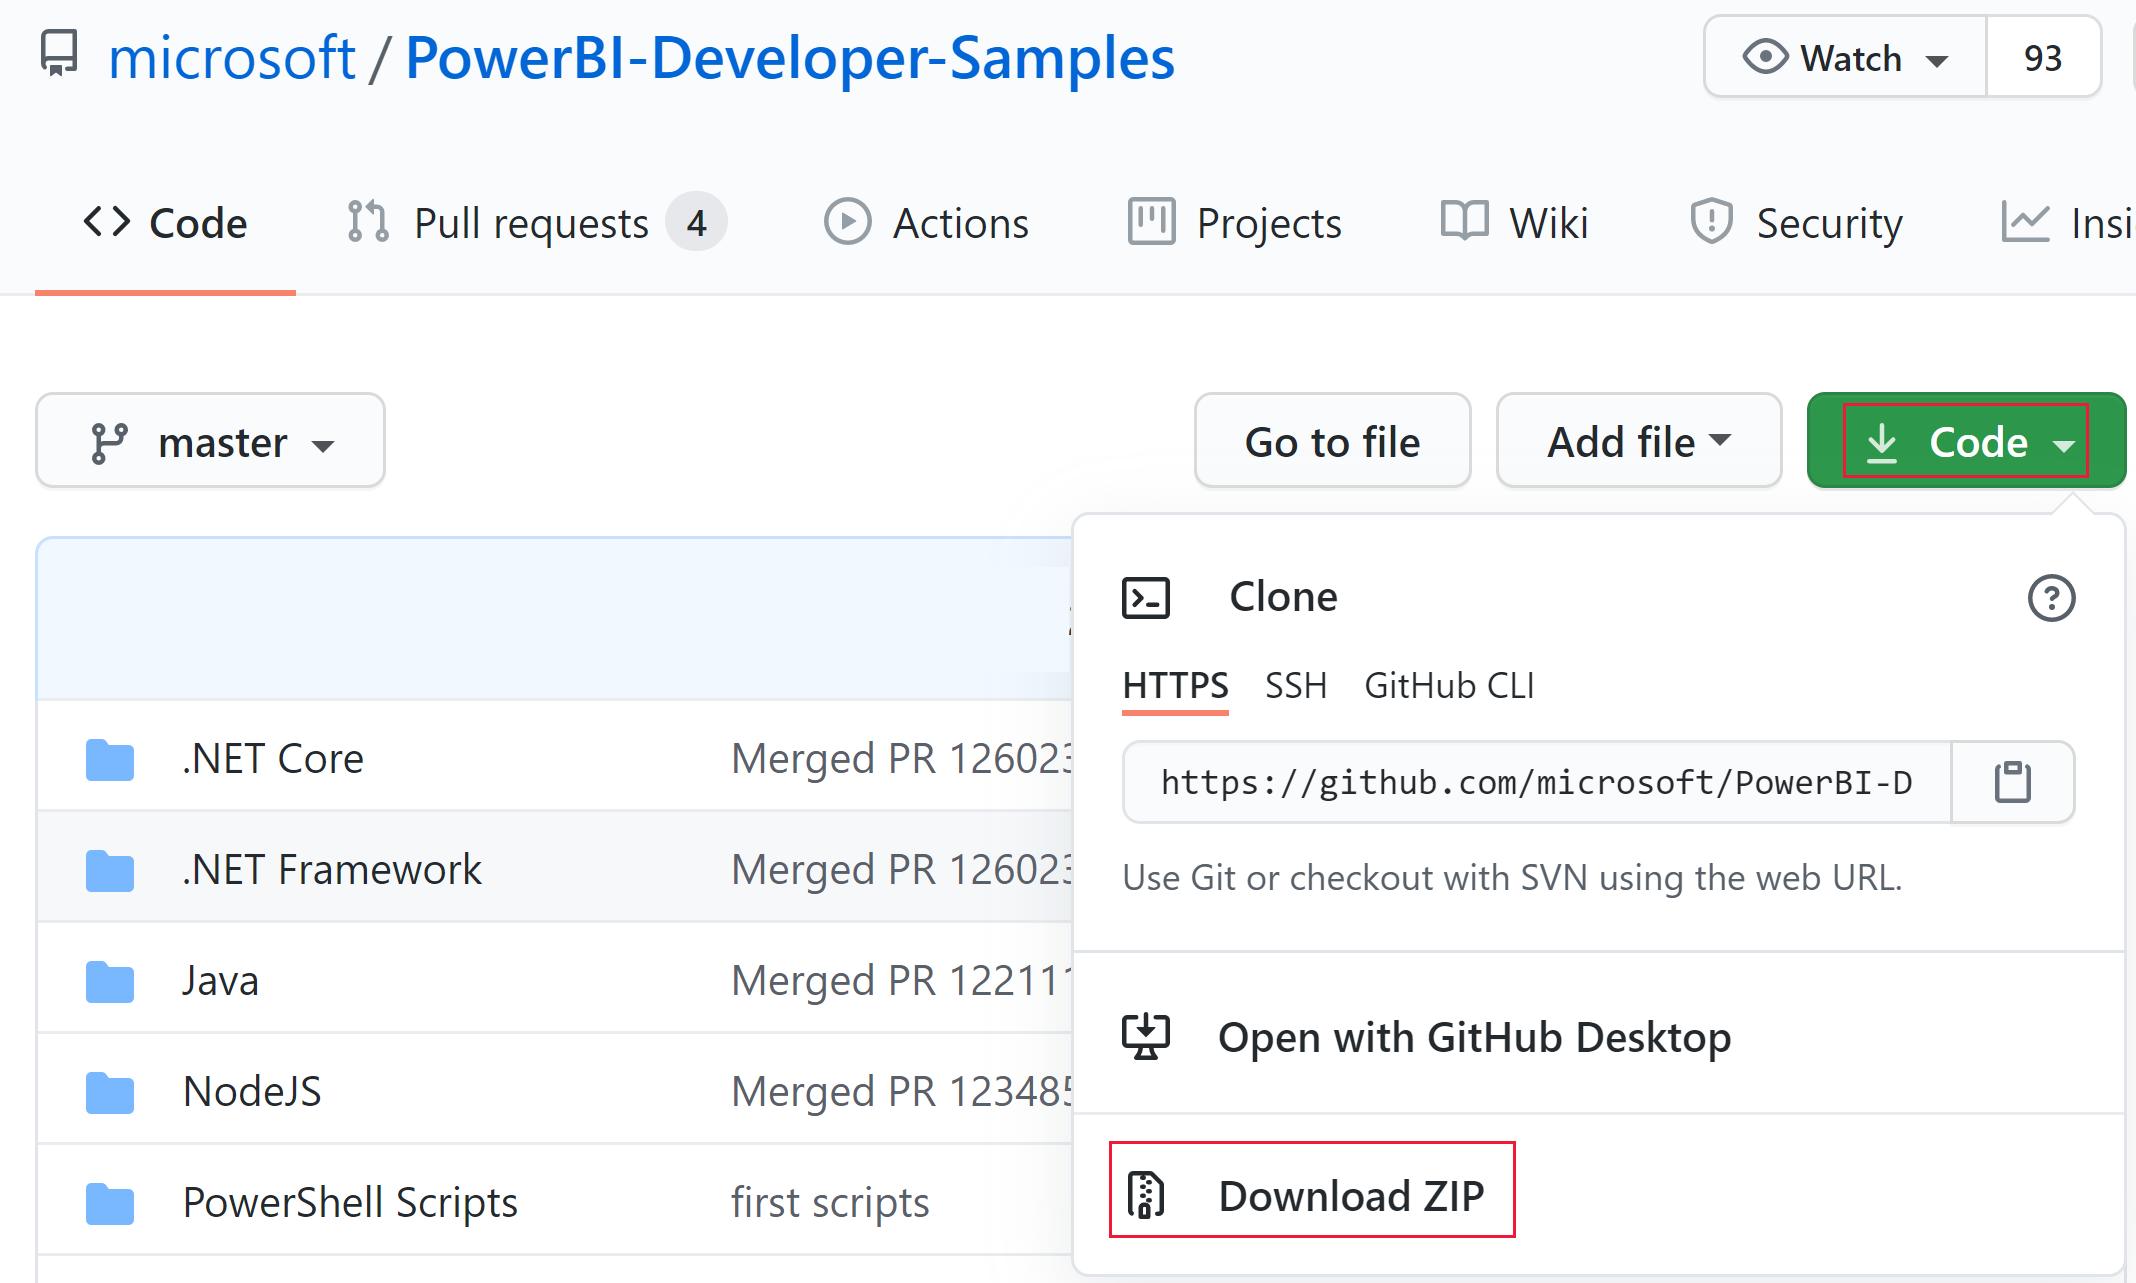 A screenshot showing the ZIP download option in the Power B I developer samples GitHub